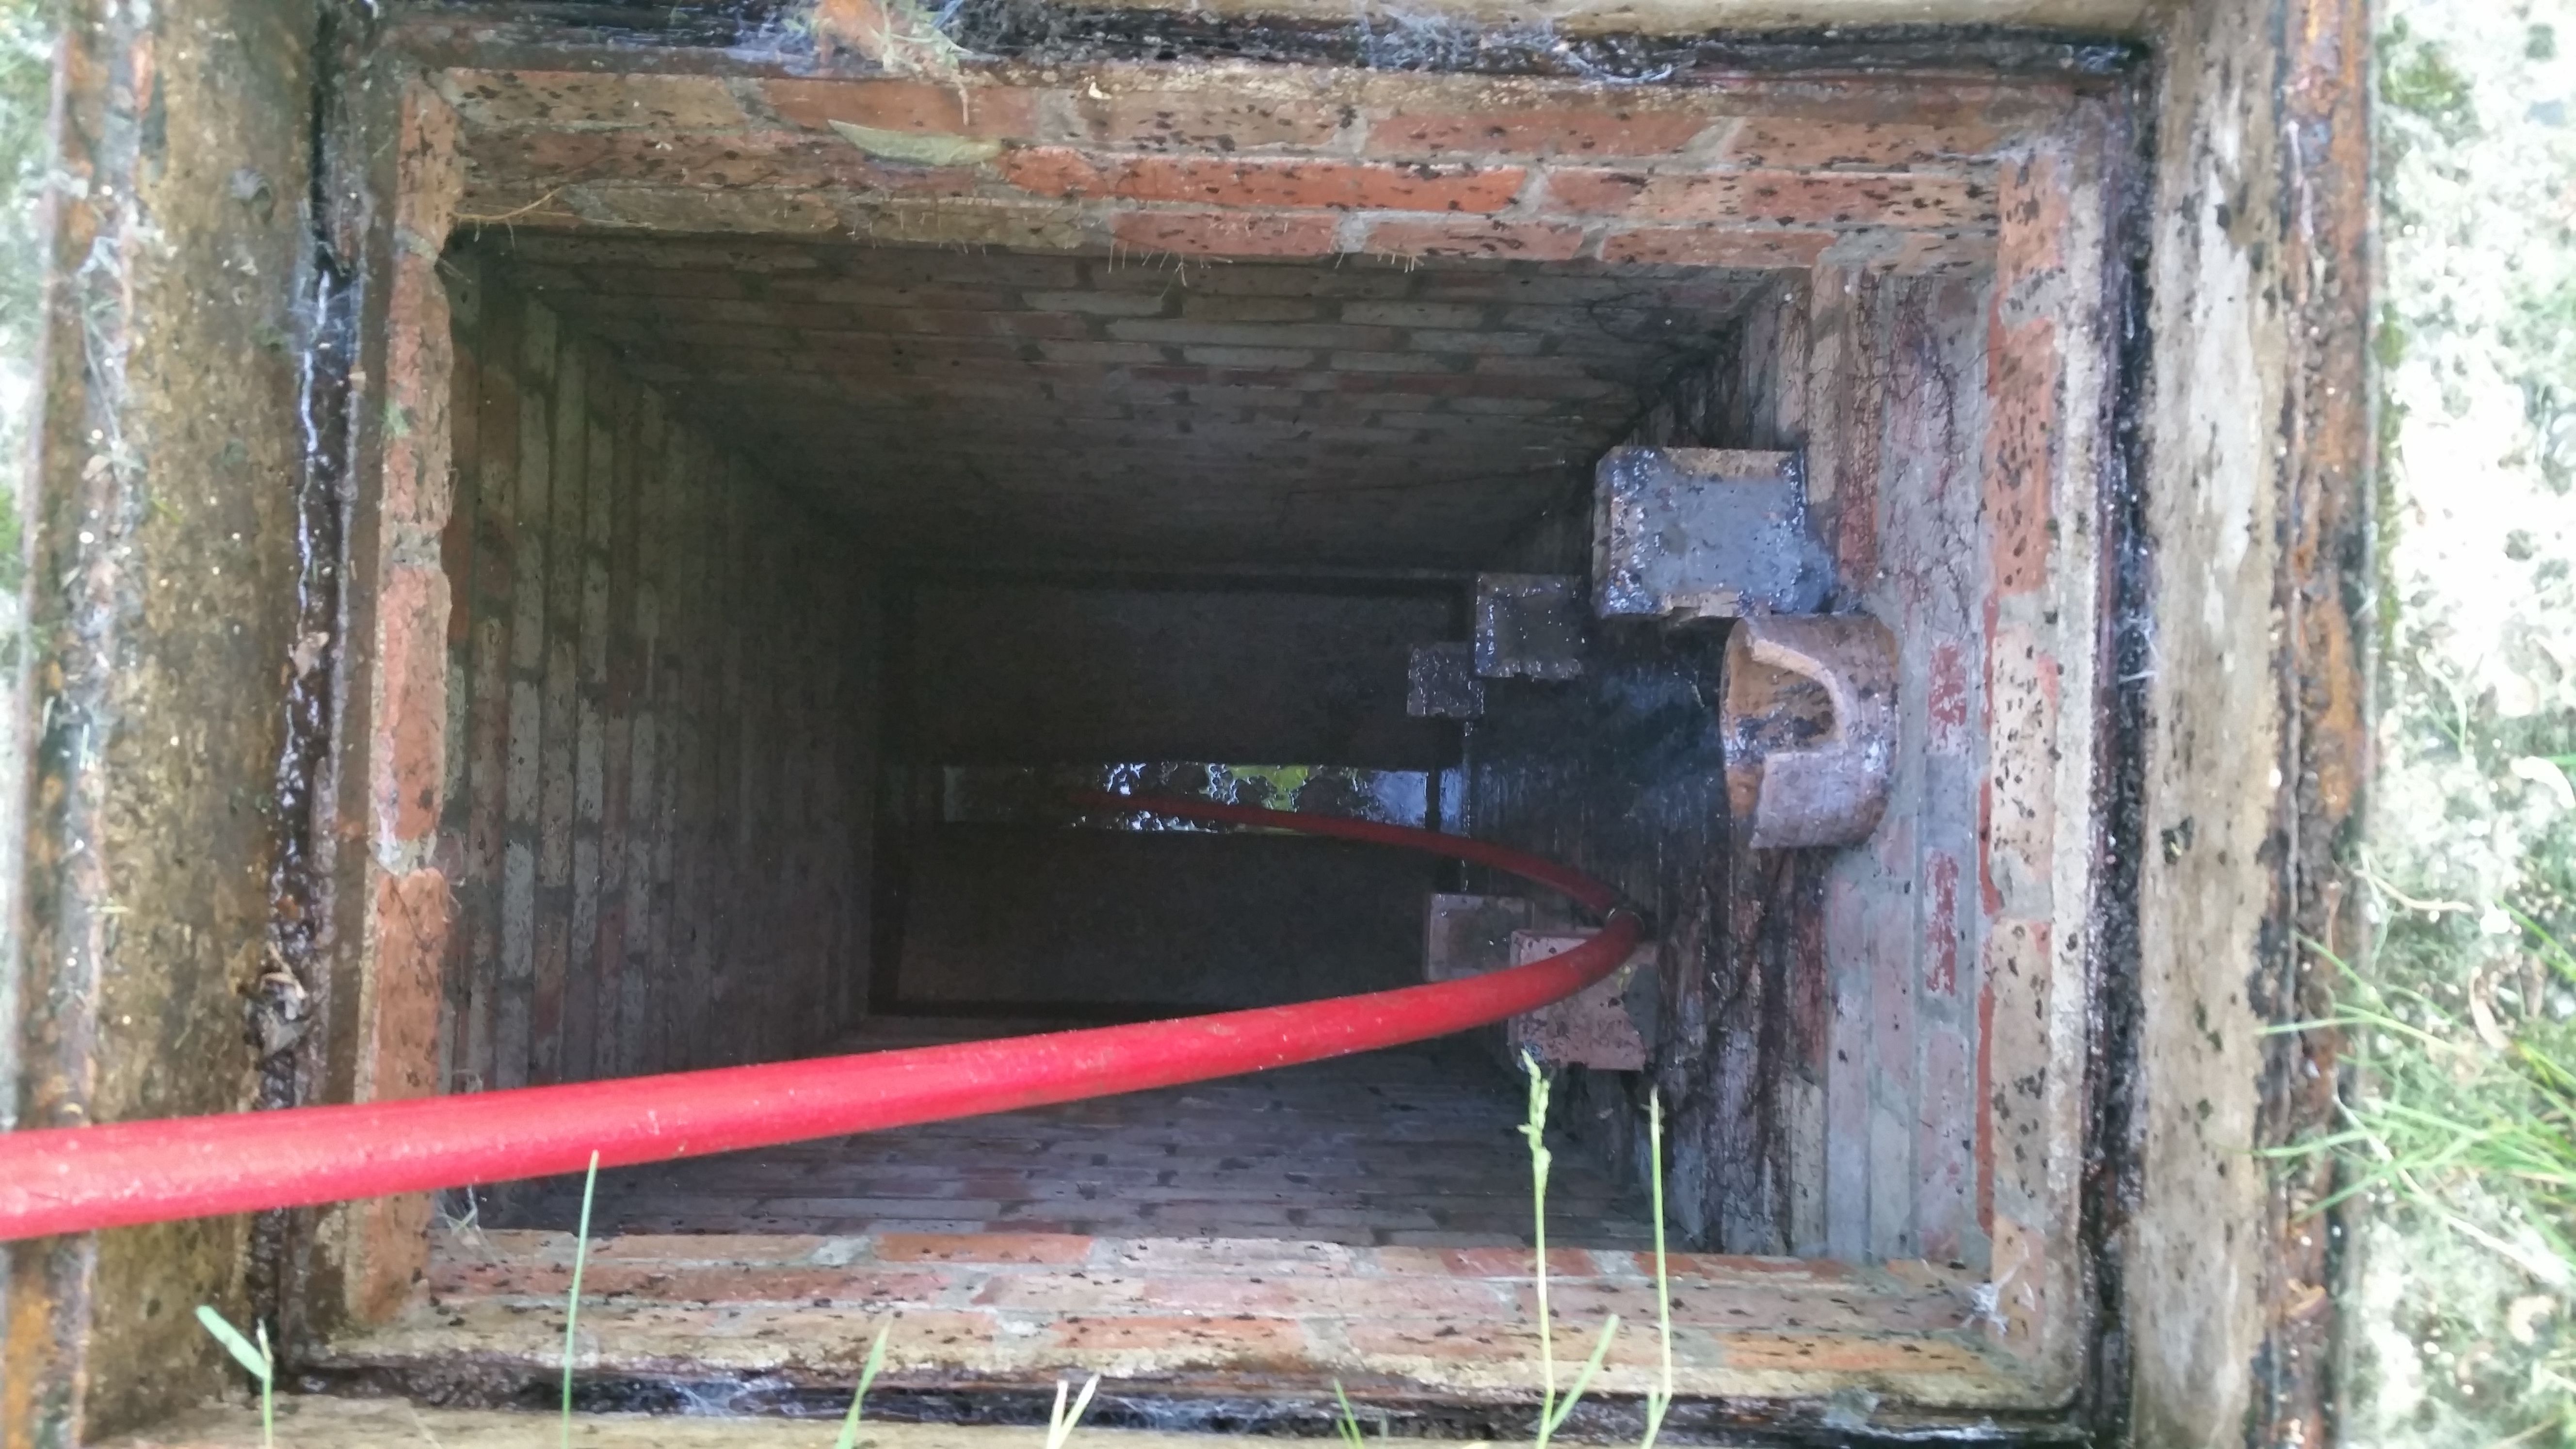 Drain being cleared using rods